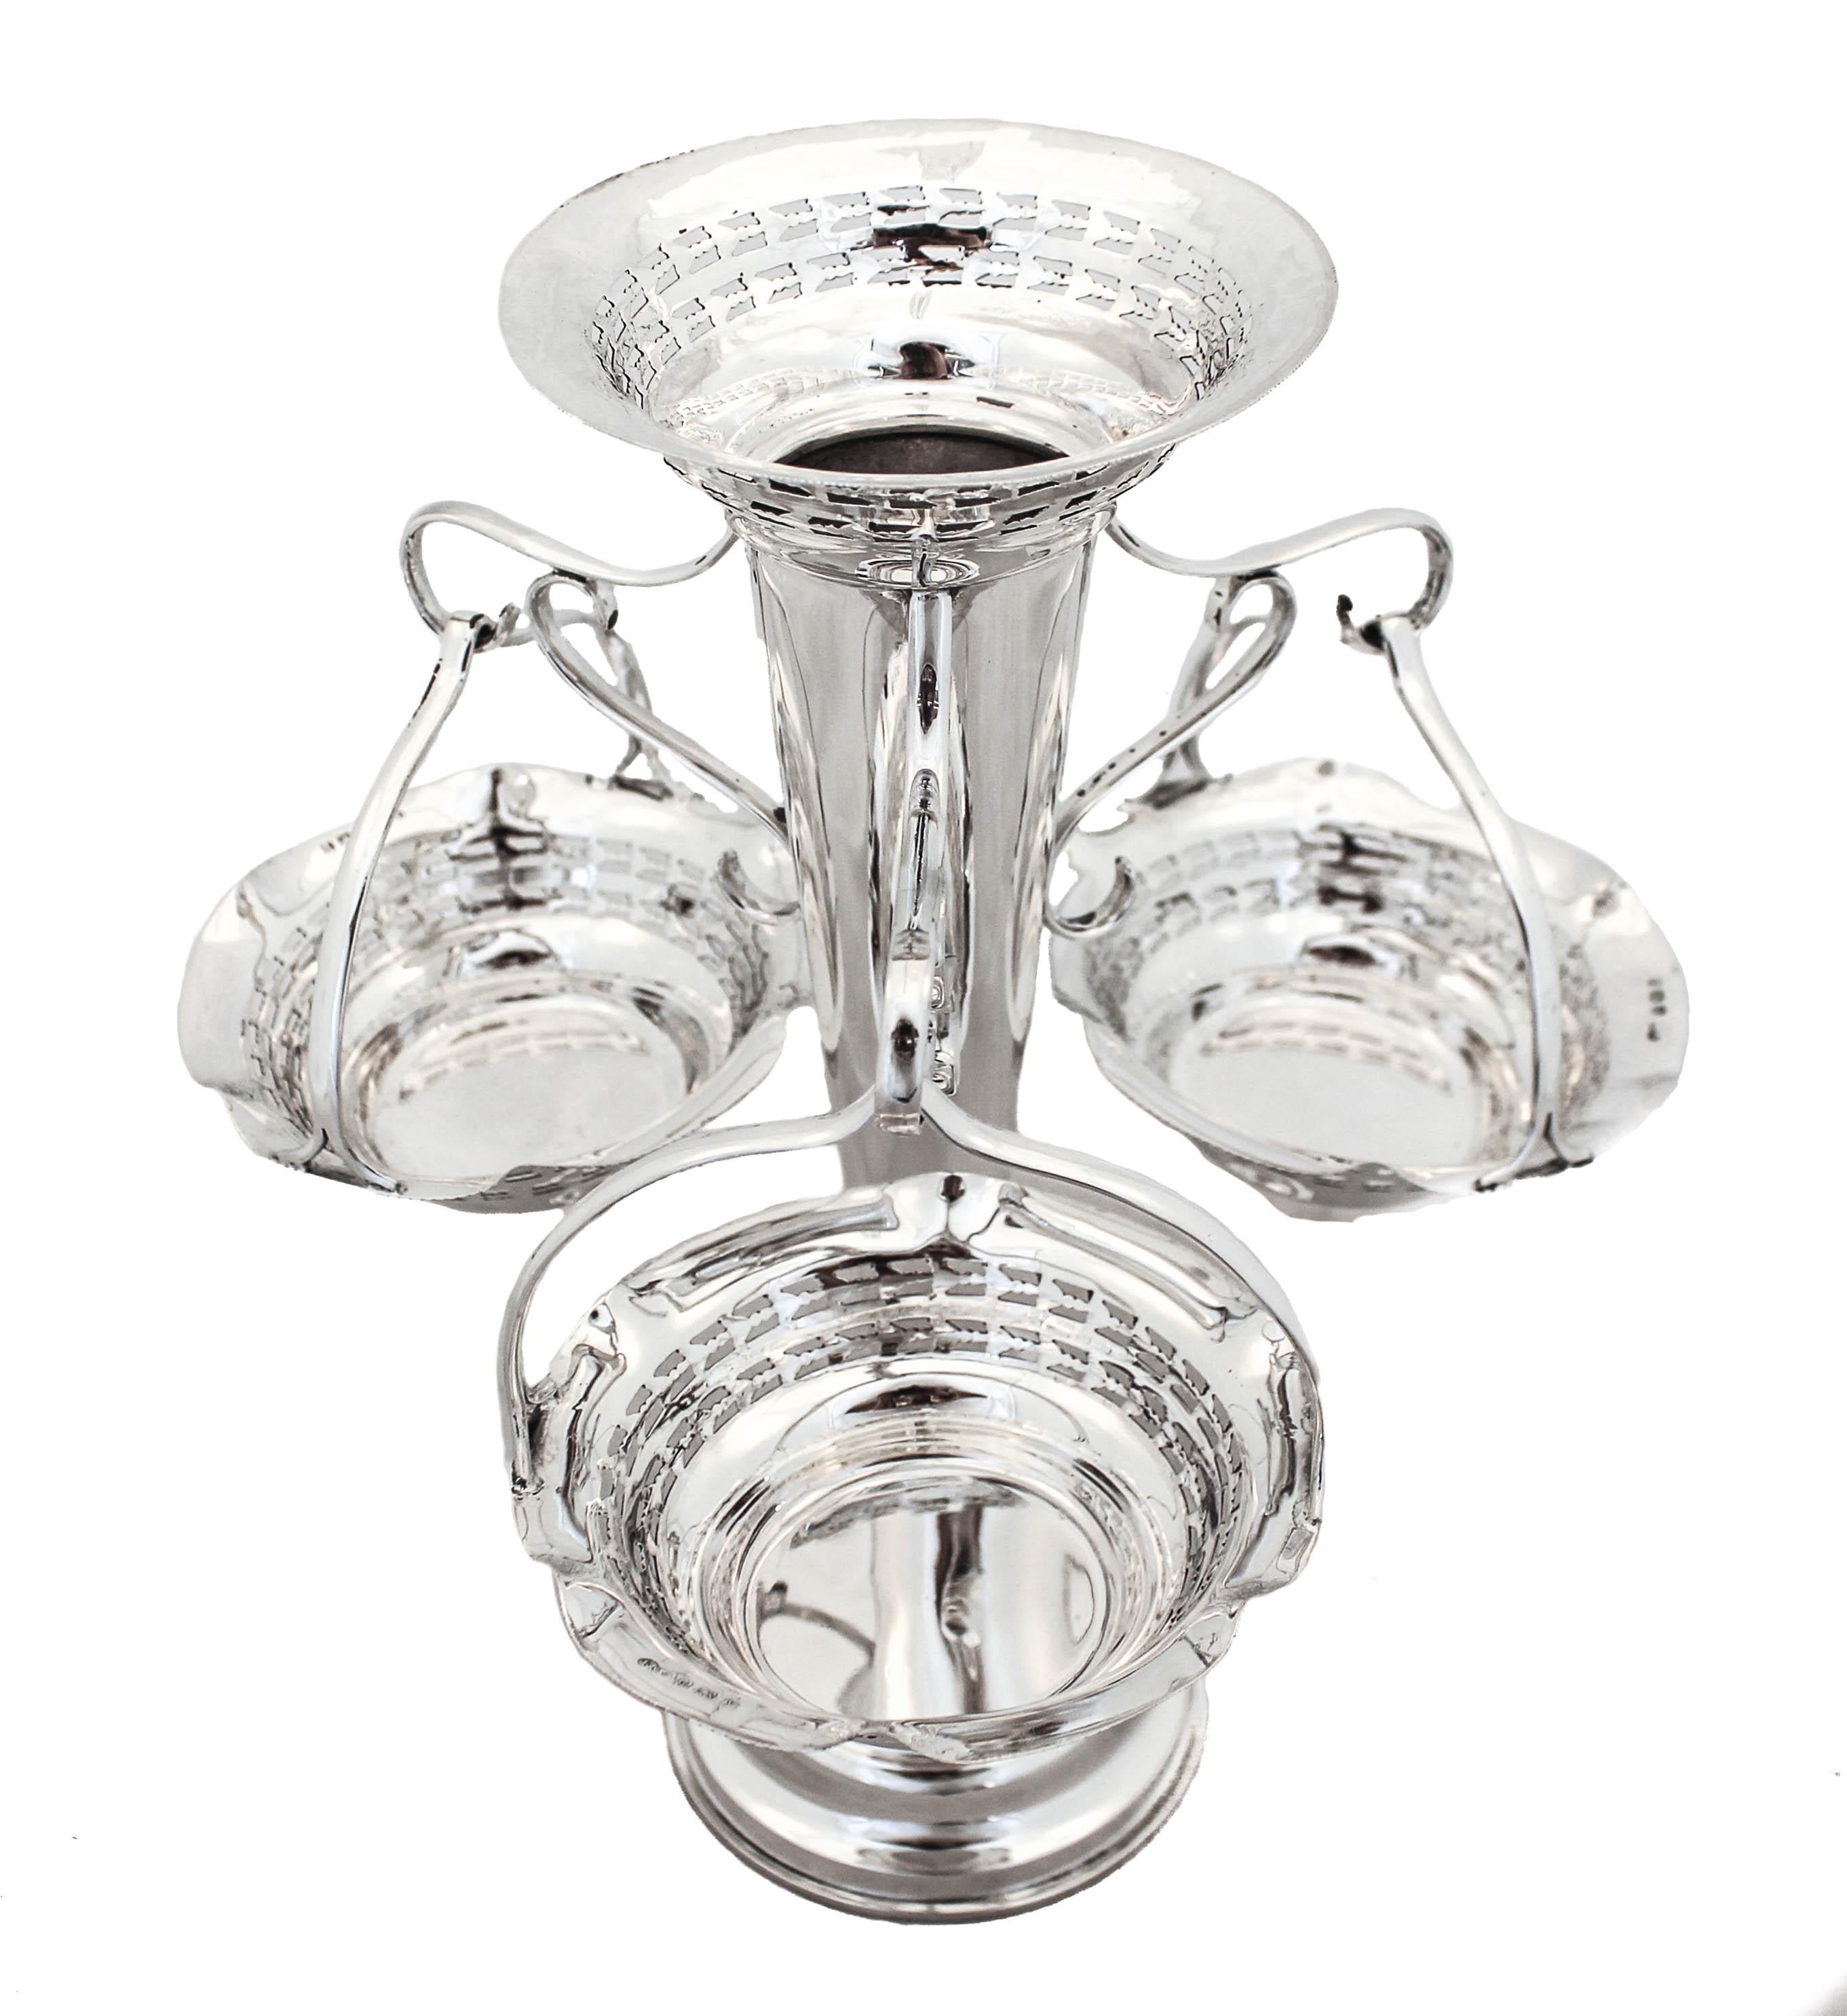 We are thrilled to offer you this rare sterling silver epergne made in Birmingham, England circa 1923. An epergne is an ornamental centerpiece for either a dining or coffee table, typically used for holding sweets and flowers. This epergne has a